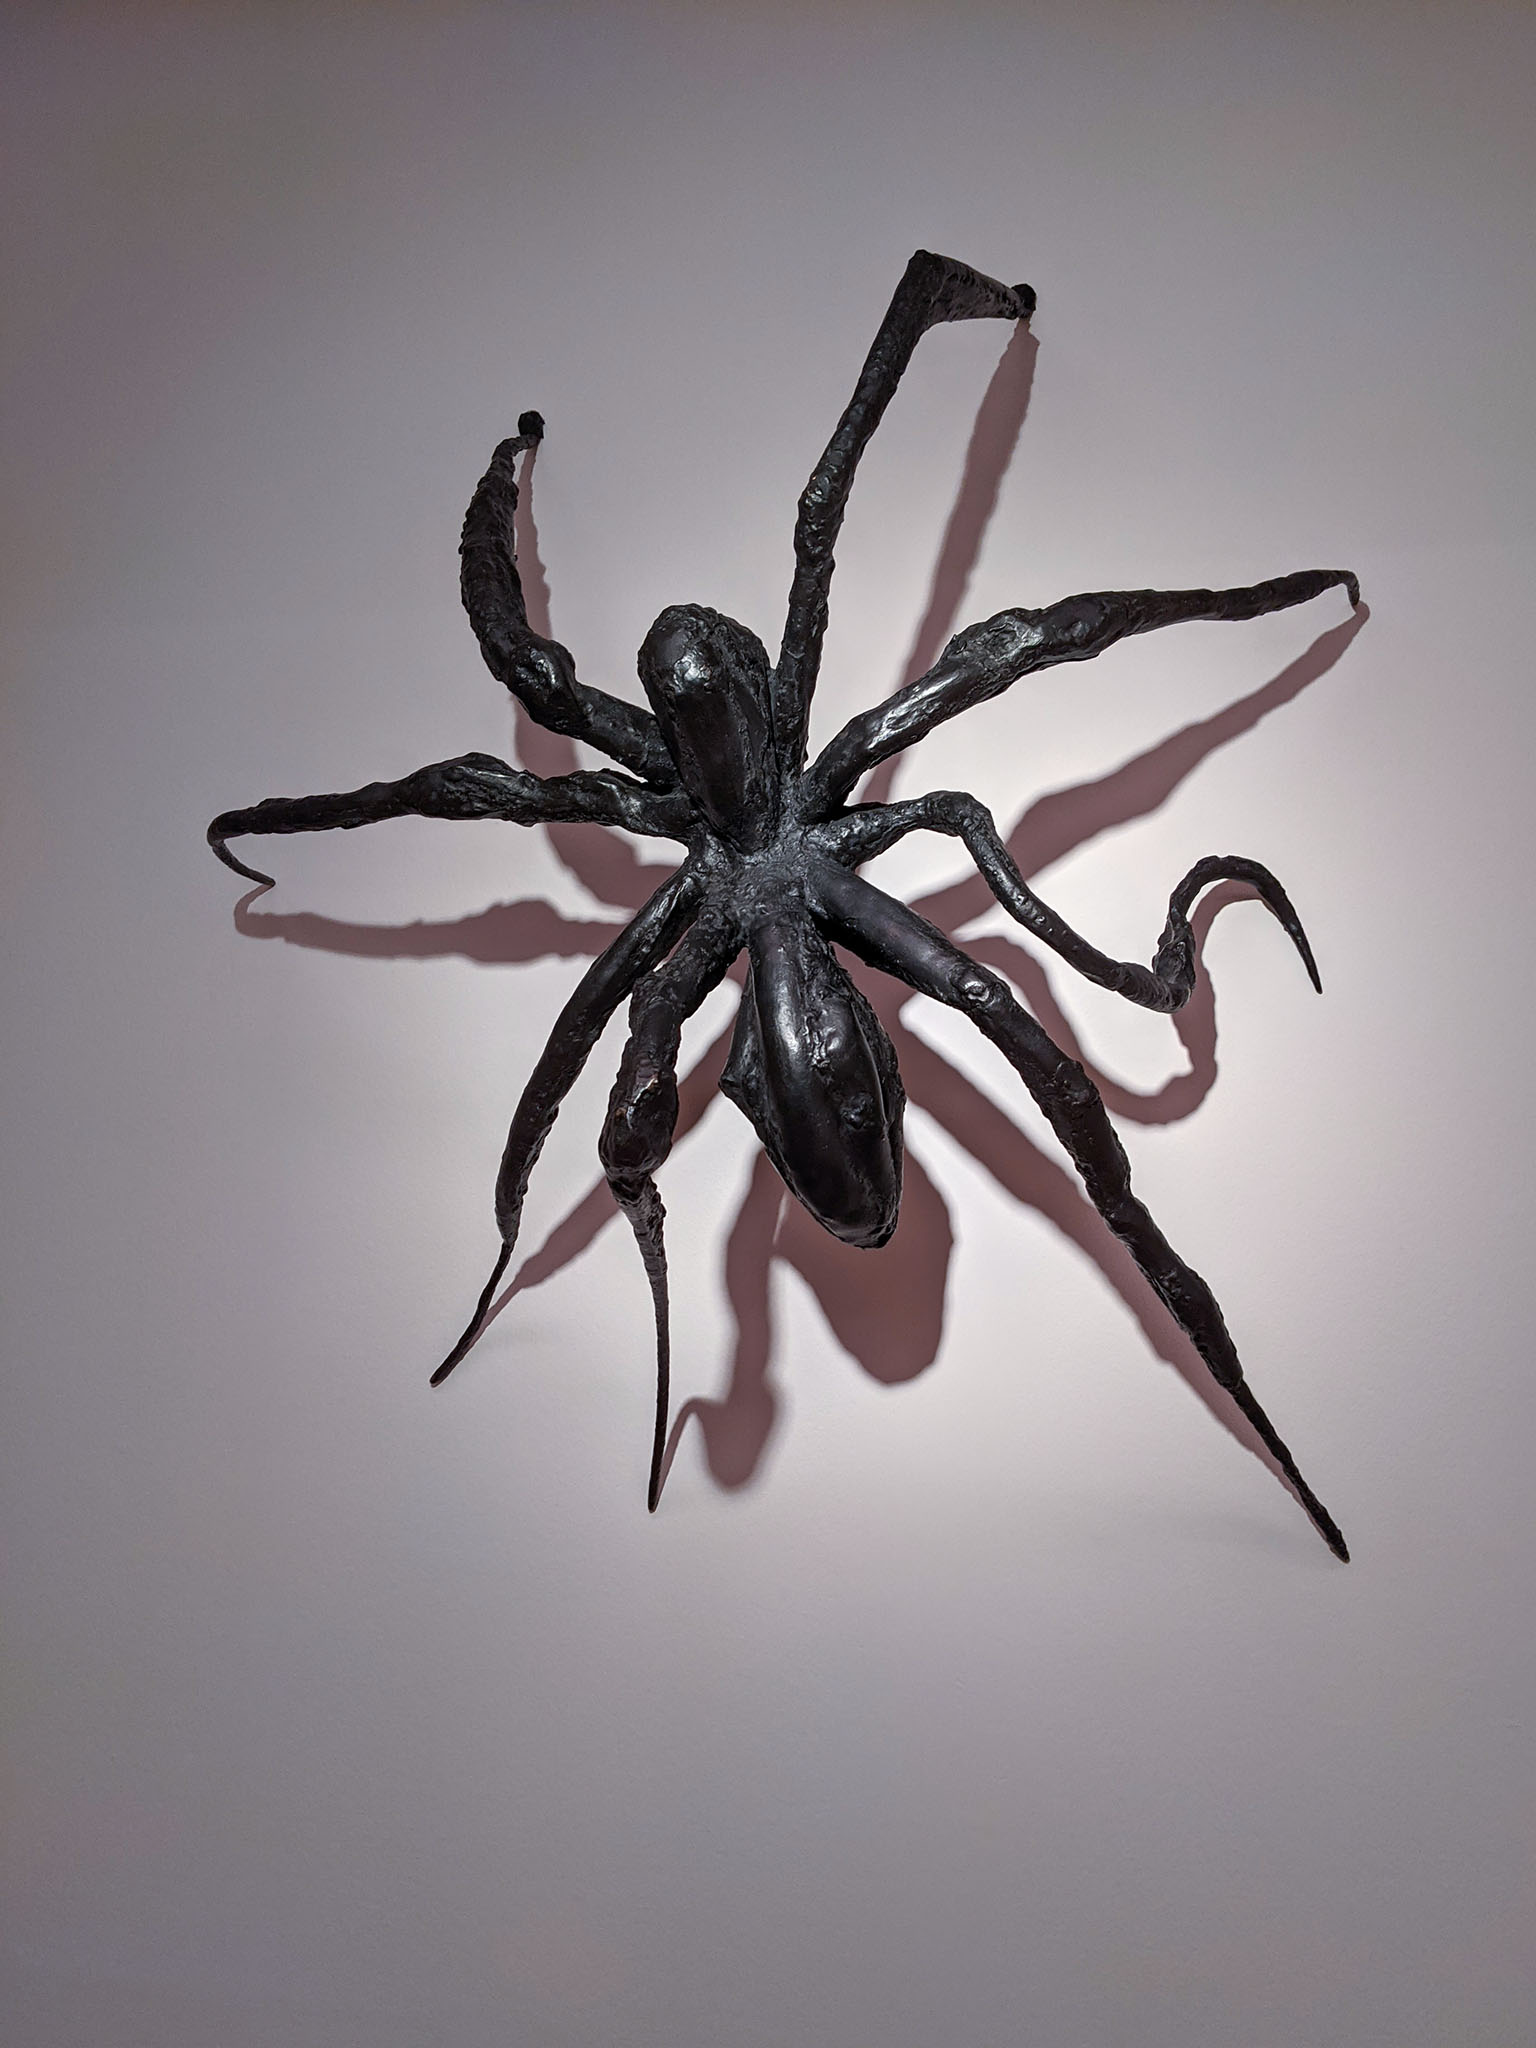 An Arachnophobe Faces Louise Bourgeois's Iconic Spiders